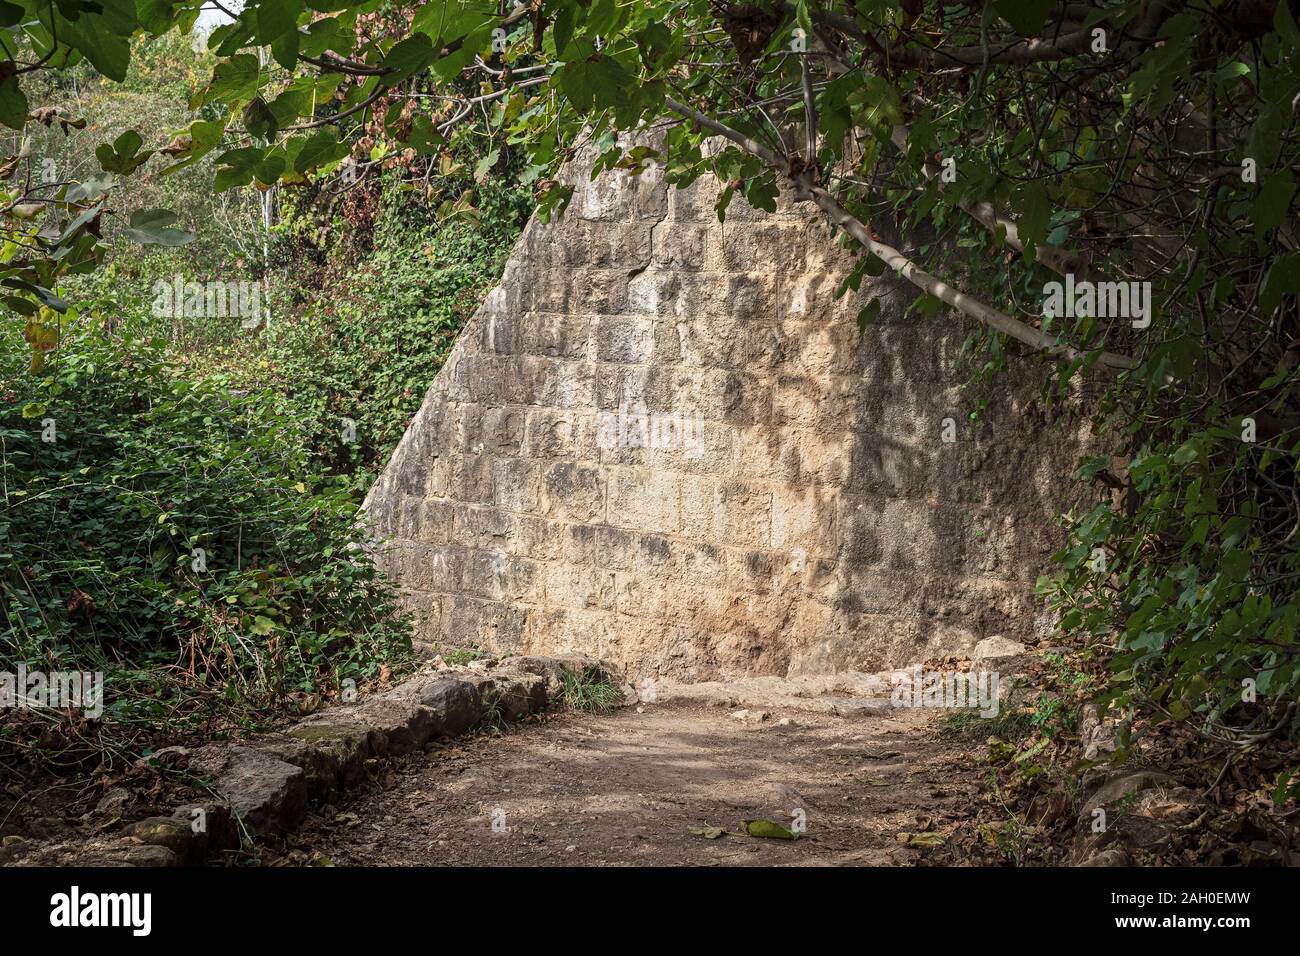 section of the ancient stone wall of the historic hydroelectric power plant on the hermon stream trail in israel surrounded by dense semitropical vege Stock Photo